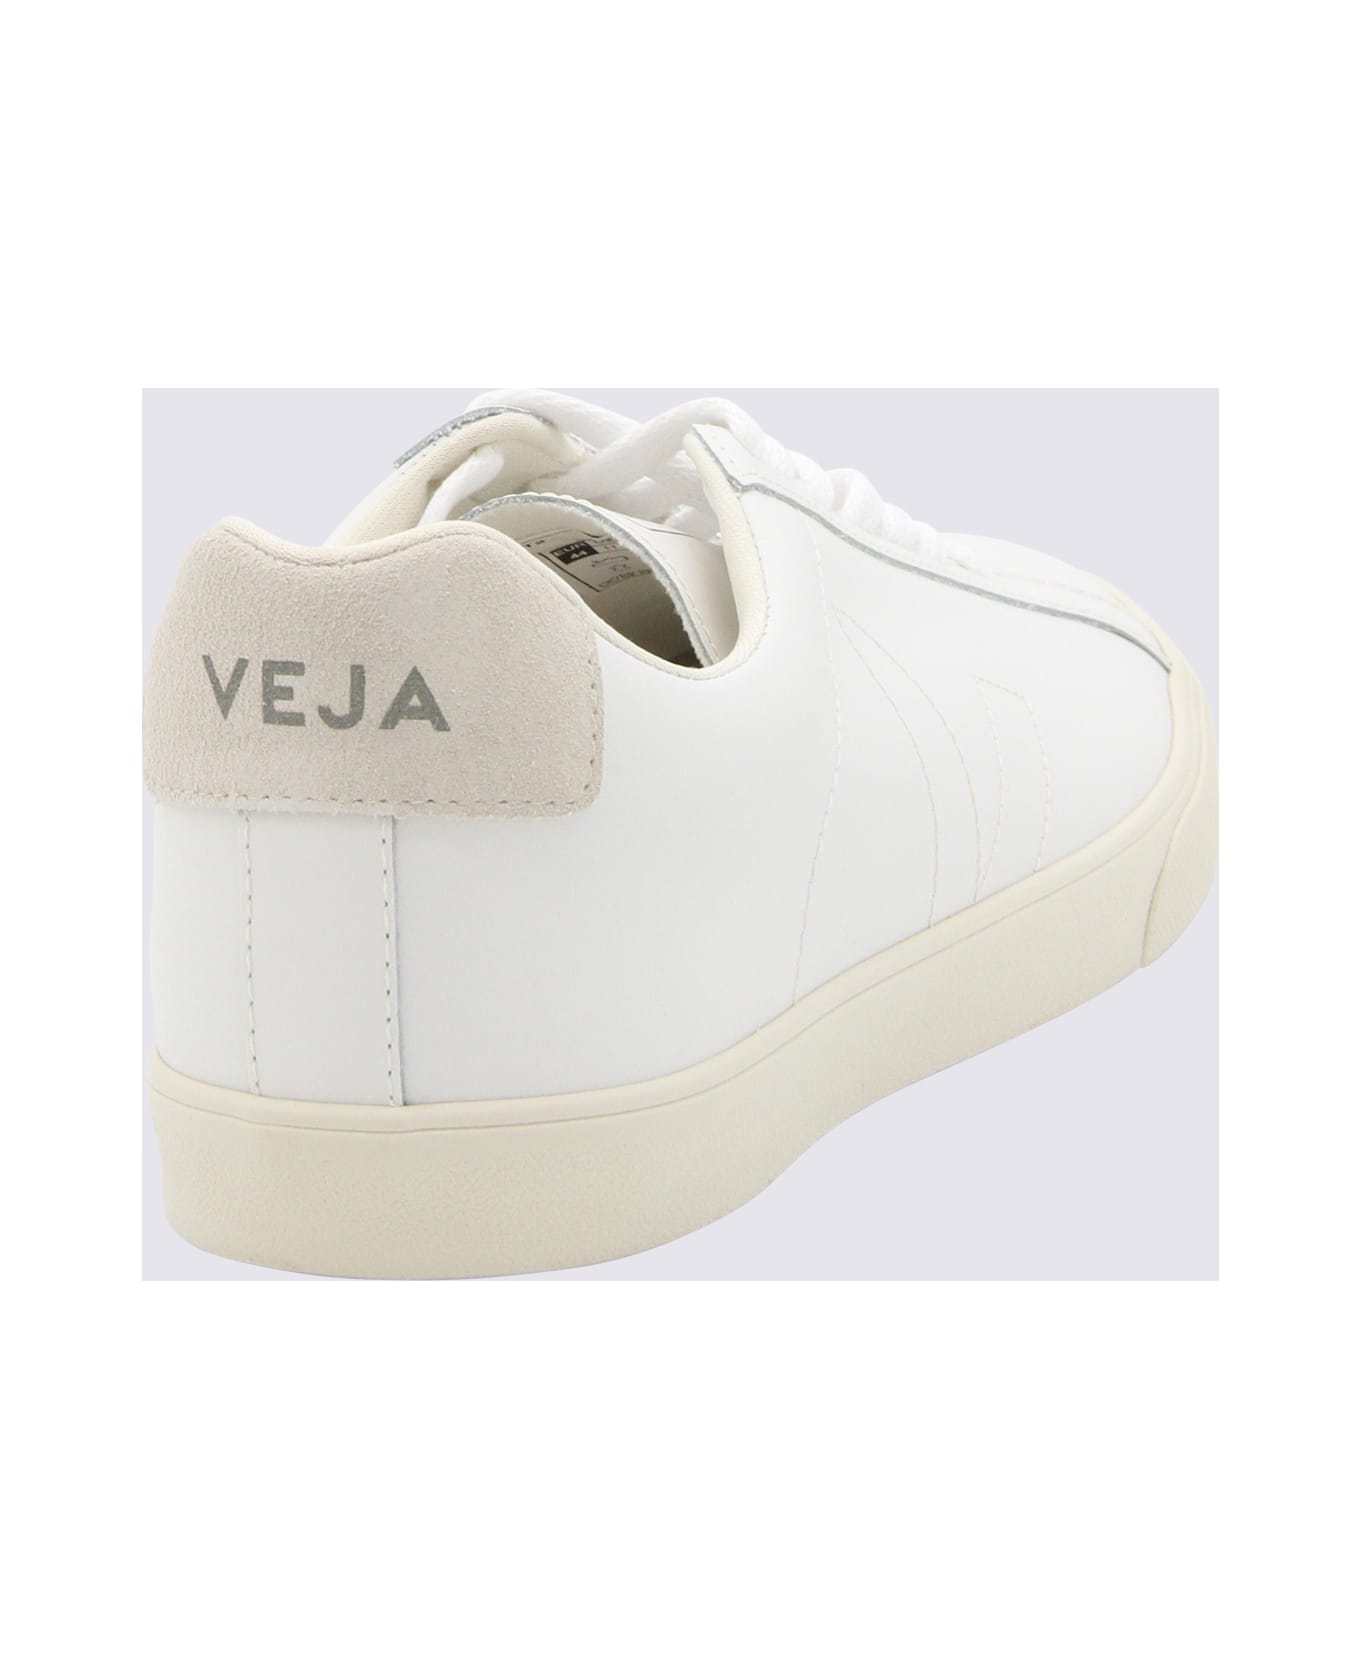 Veja White And Beige Faux Leather Esplar Sneakers - EXTRA-WHITE